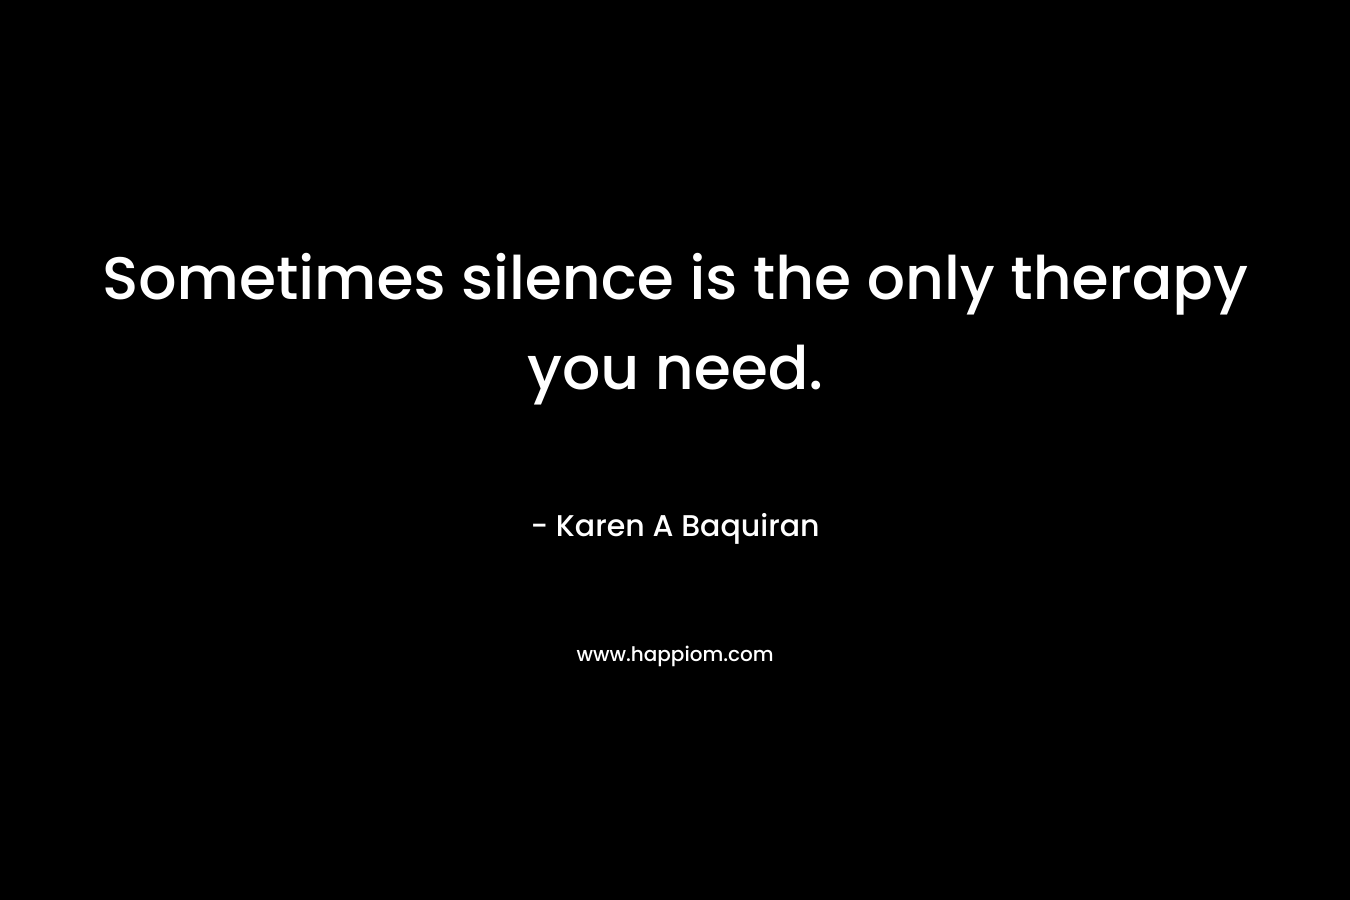 Sometimes silence is the only therapy you need.